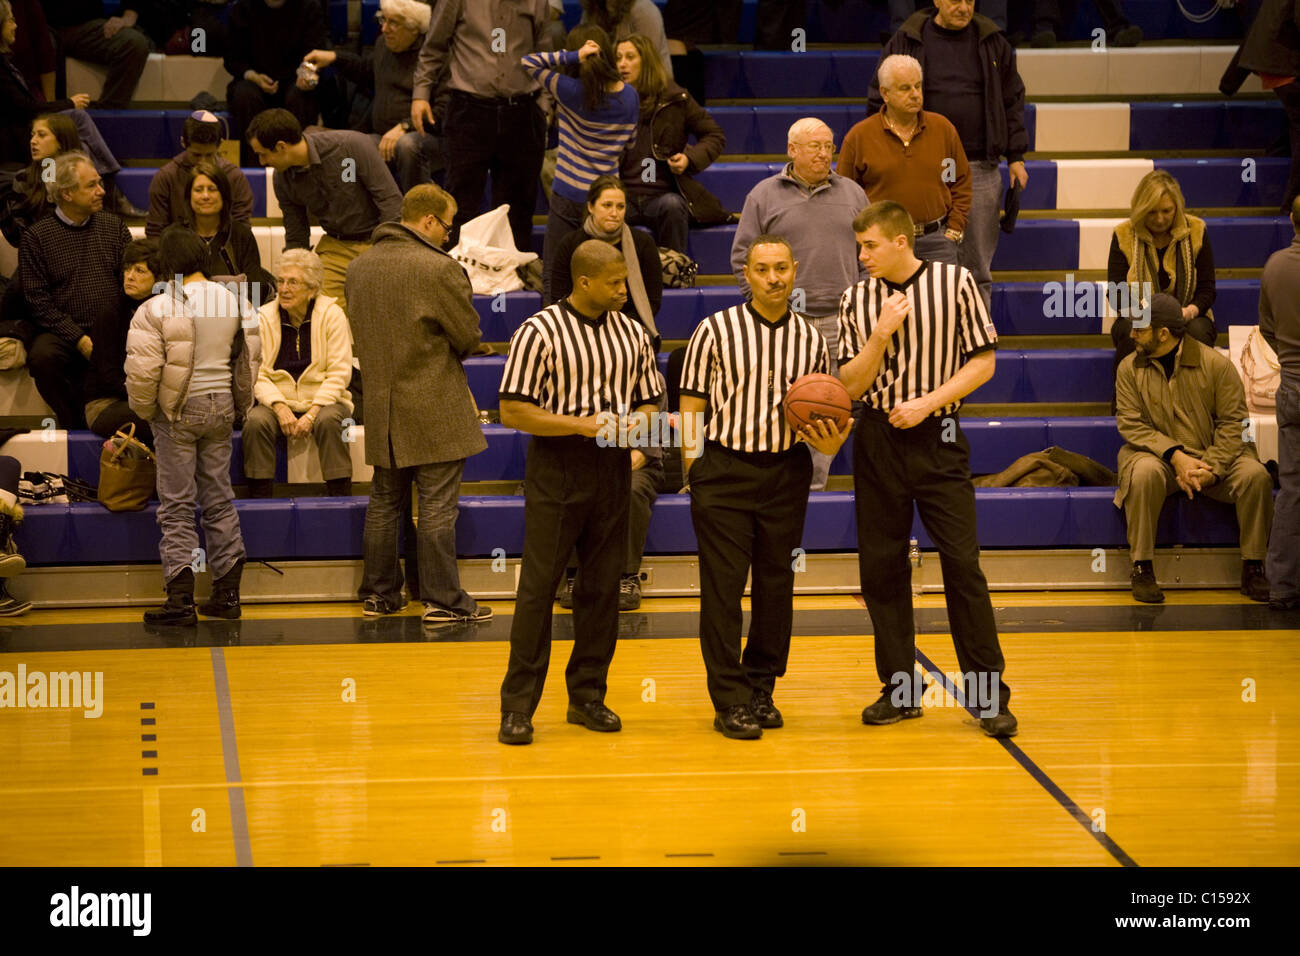 Referees consult at half time at a college basketball game in New York City. Stock Photo